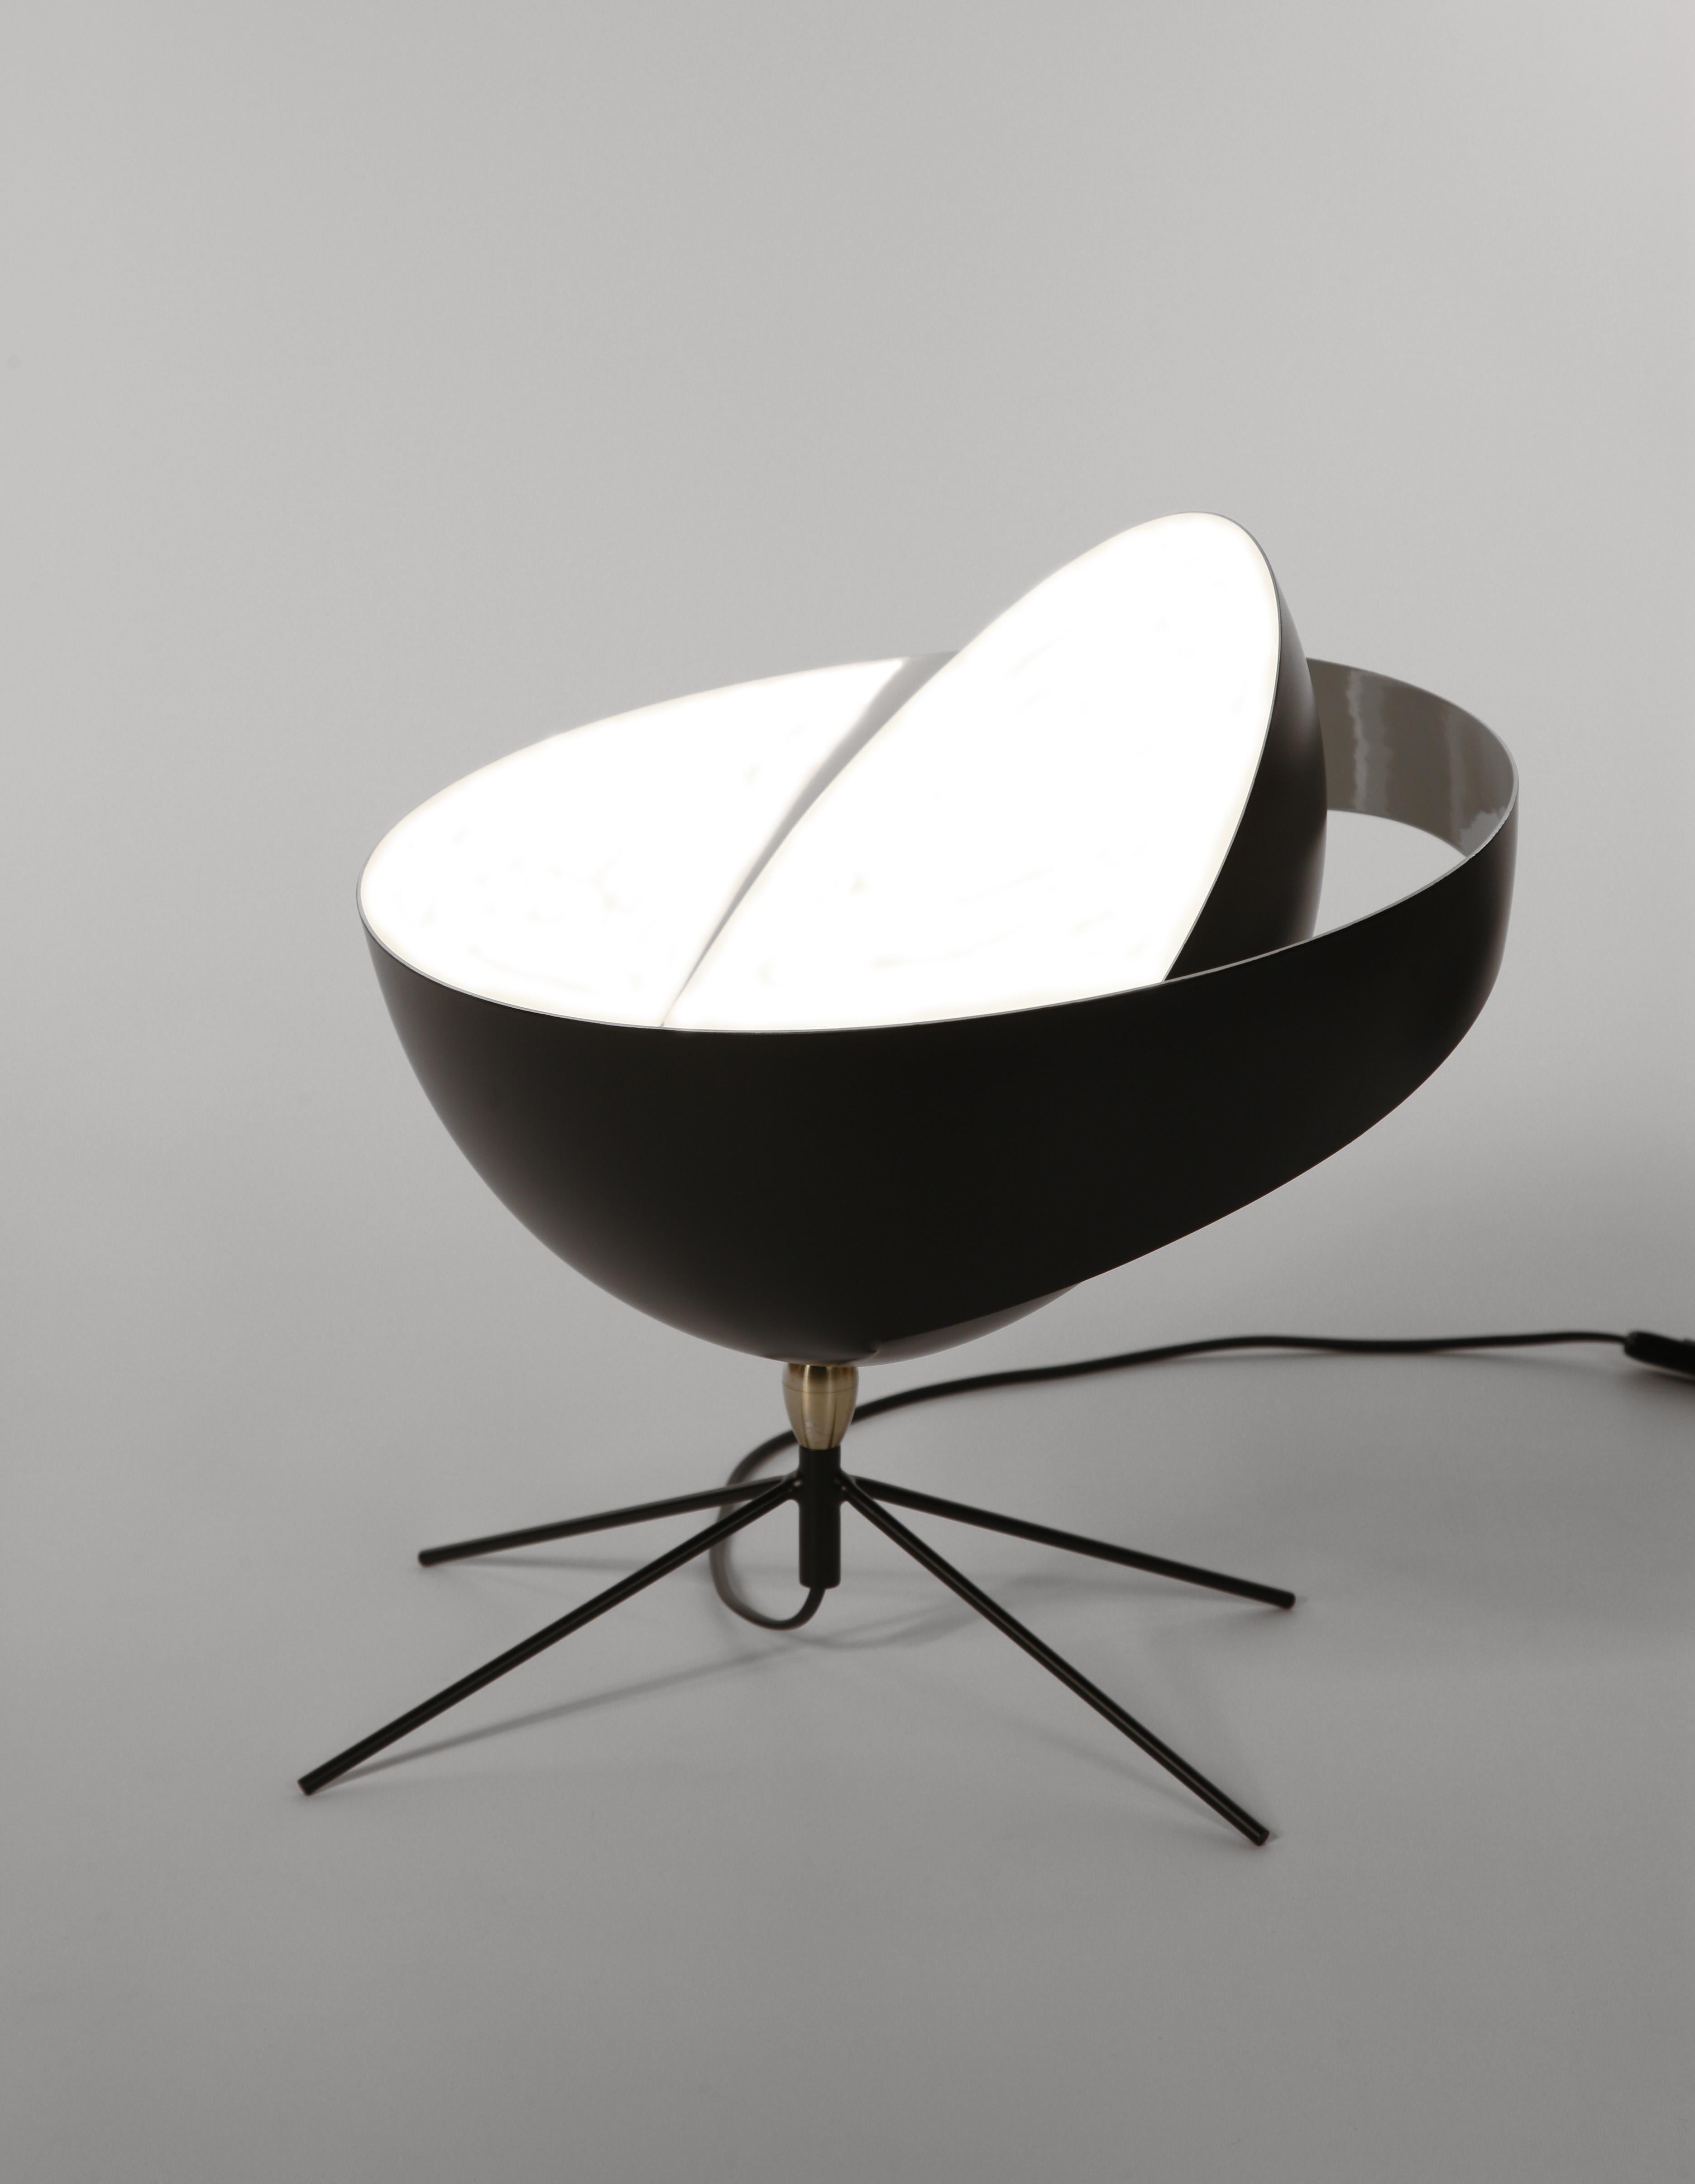 French Serge Mouille Mid-Century Modern Black Saturn Table Lamp For Sale